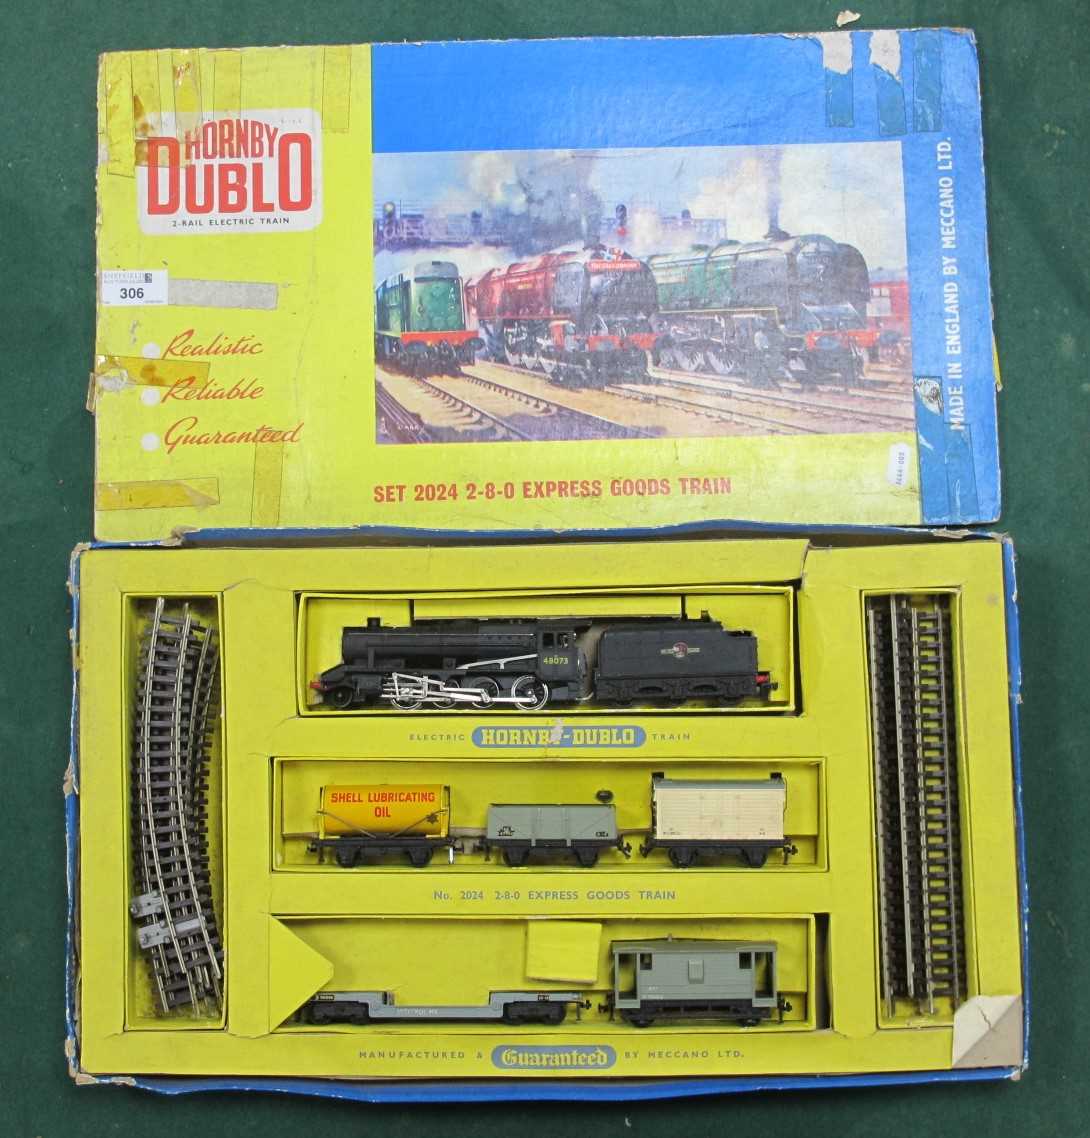 A Hornby Dublo 'OO' Gauge/4mm Two Rail Ref No 2024 Express Goods Train Set, consisting of a 2-8-0